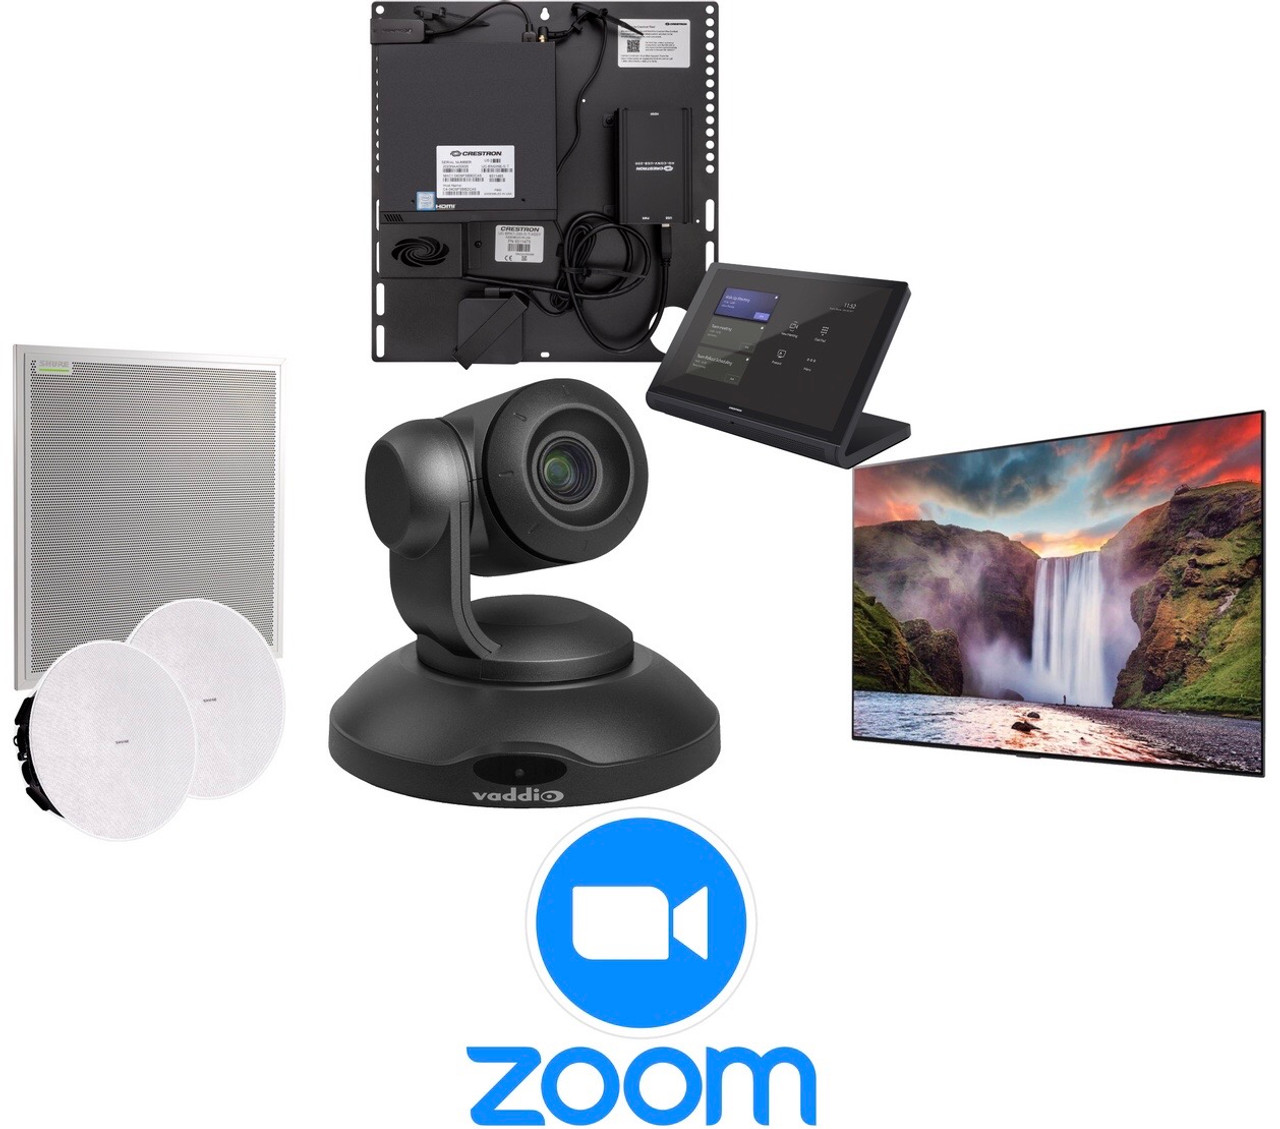 Zoom Conference Solution, Information Technology